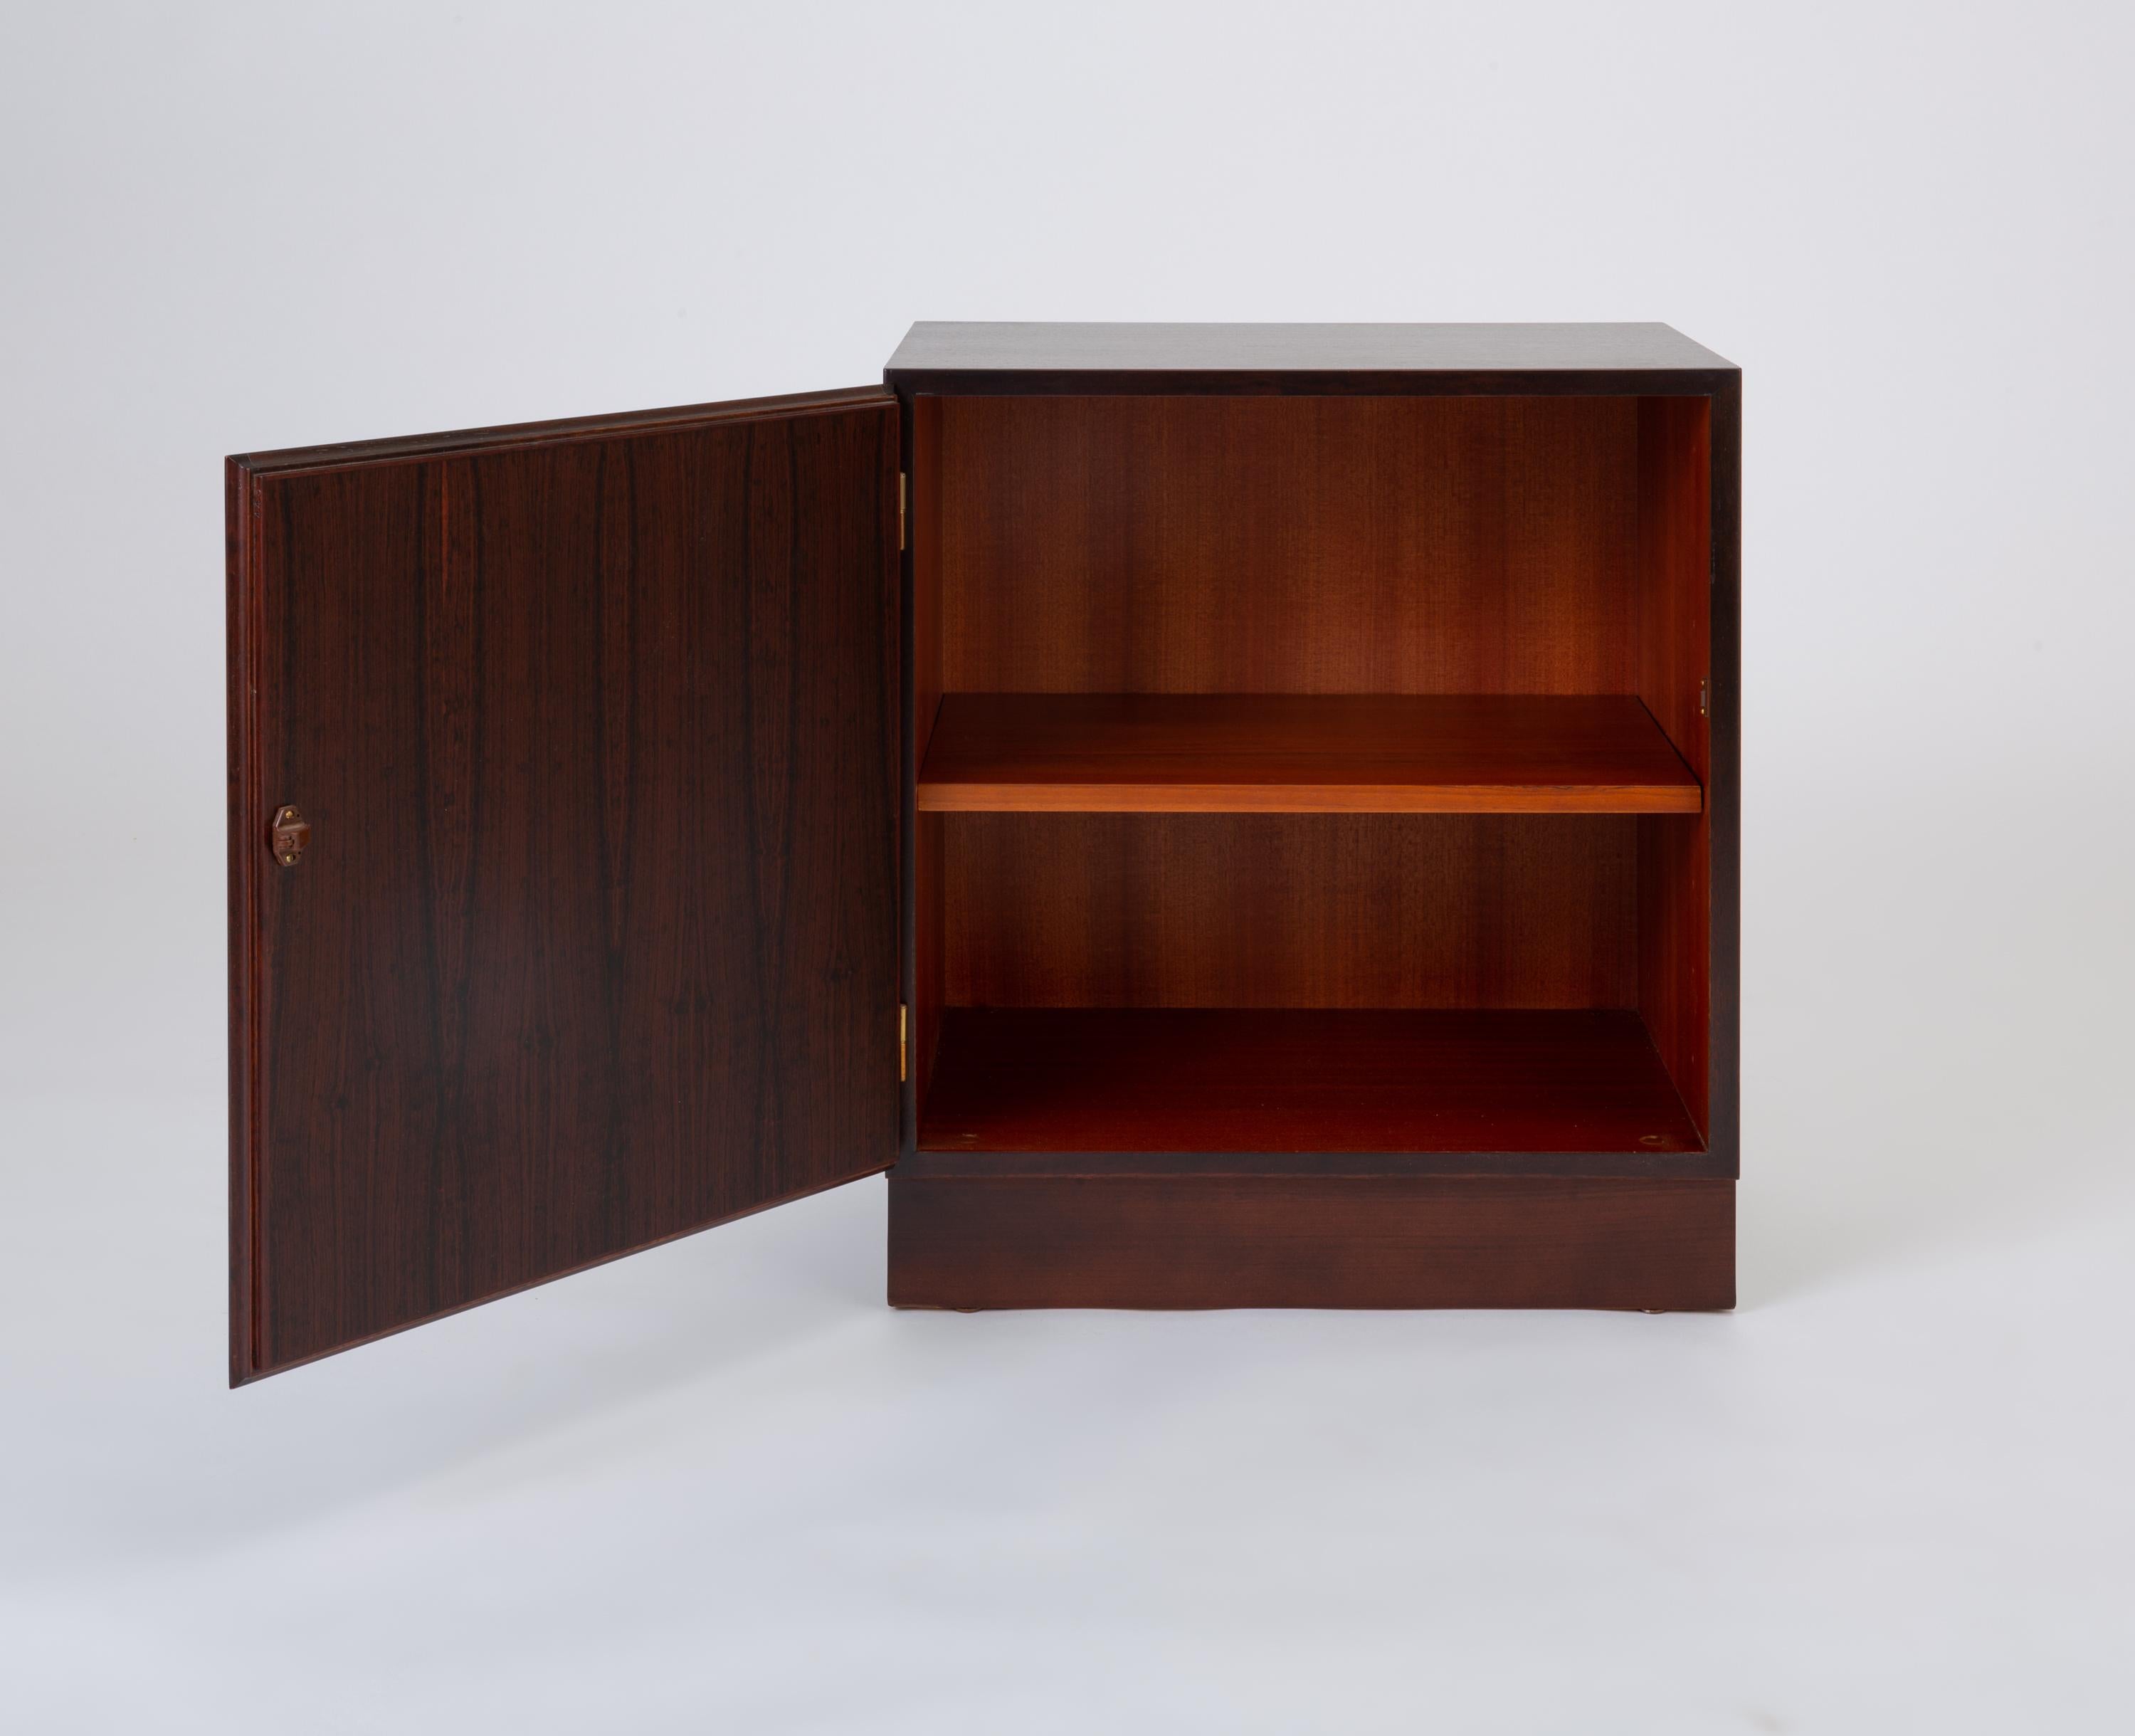 A 1970s rosewood cabinet from the Classic collection by Omann Jun. The modest storage model was designed to work as a standalone piece or in conjunction with other Classic modules to form a larger cabinetry system. This example has a simple rosewood